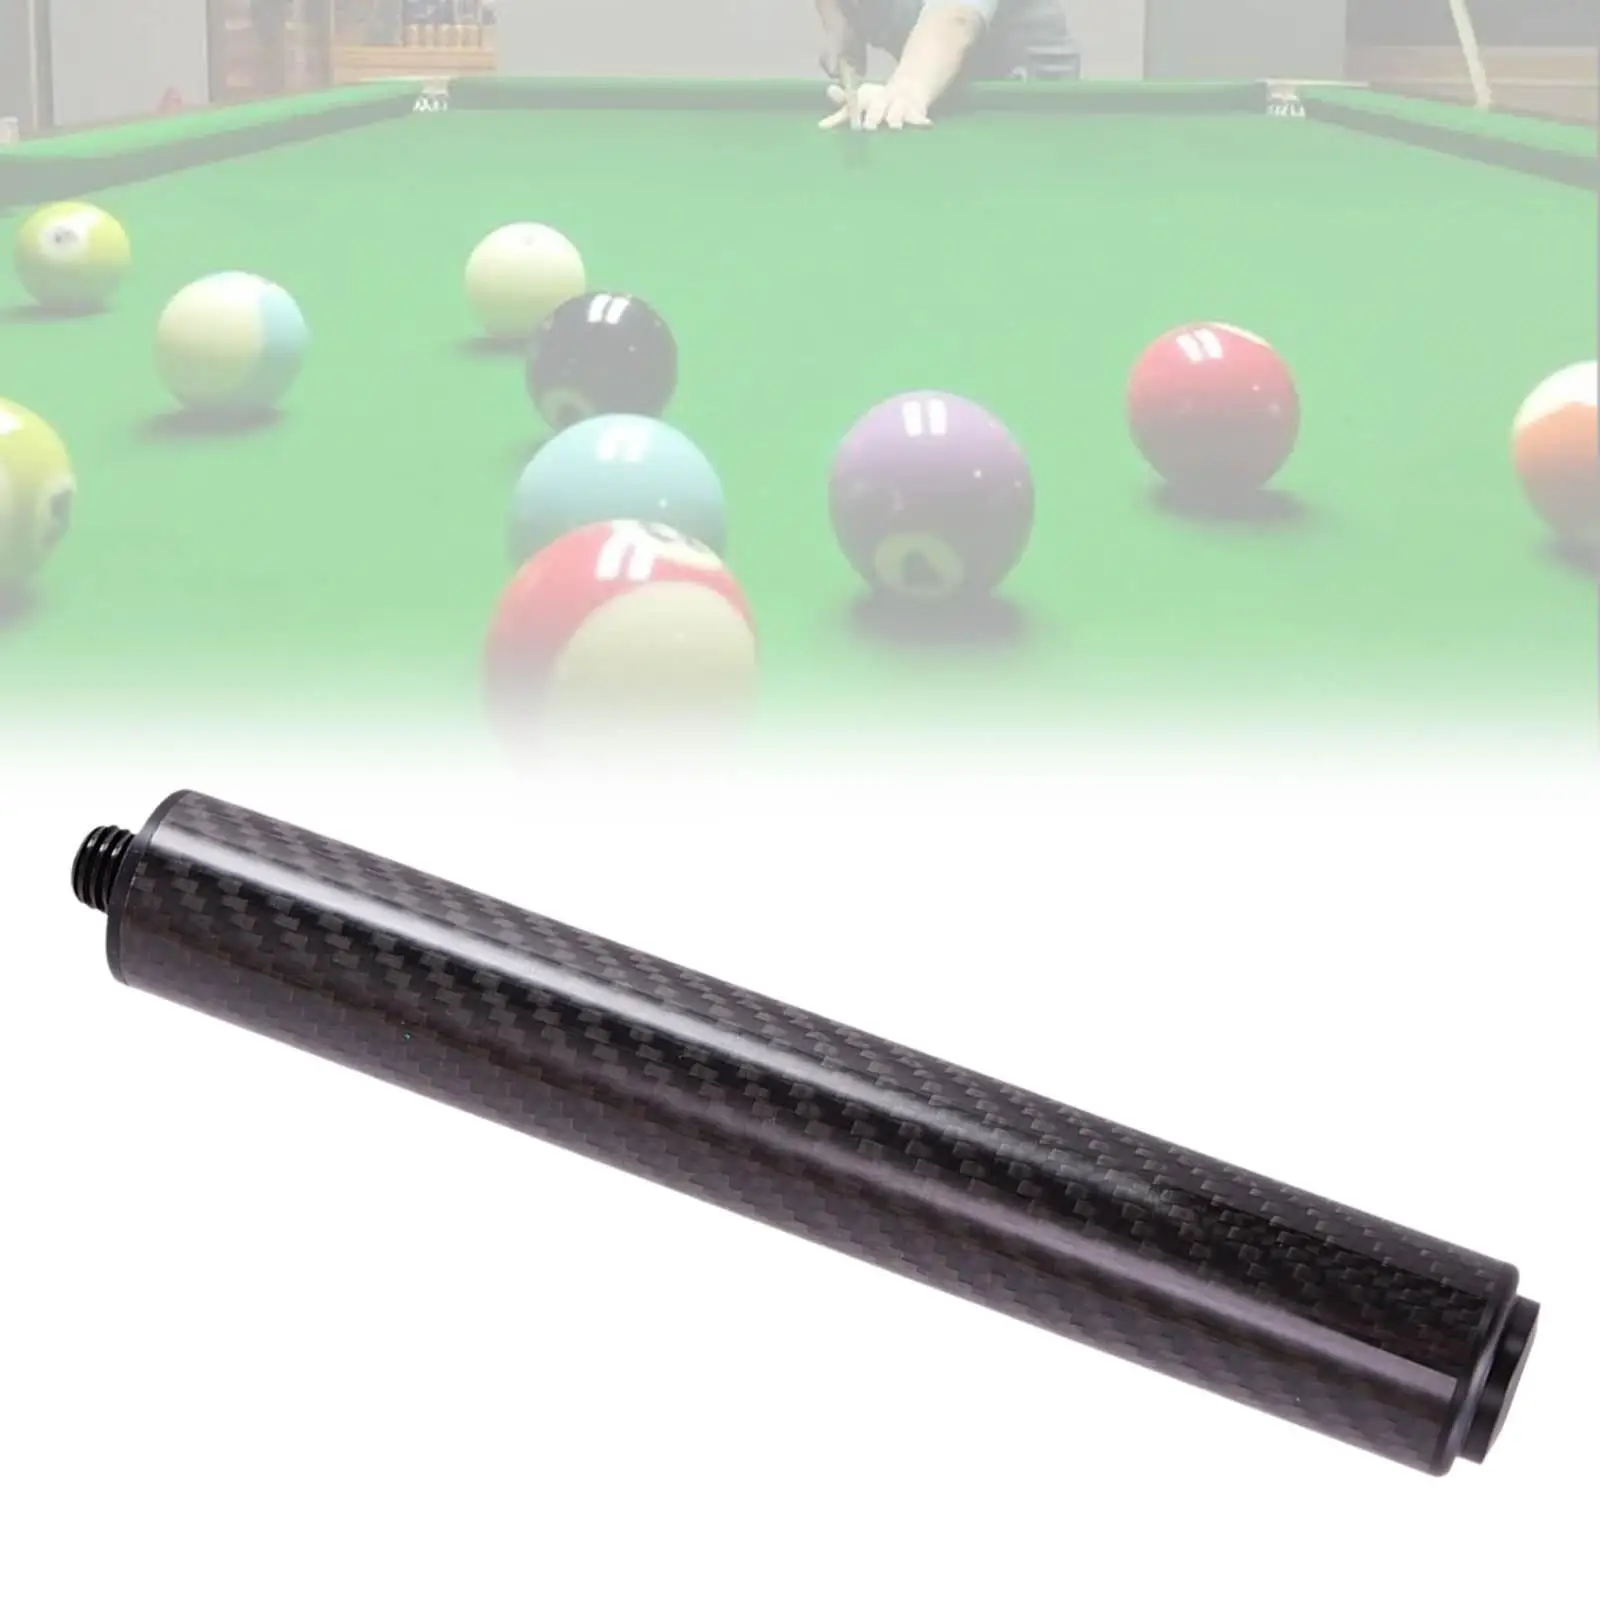 Lightweight Billiards Cue Extensions Pool Stick Extension Parts Accessories